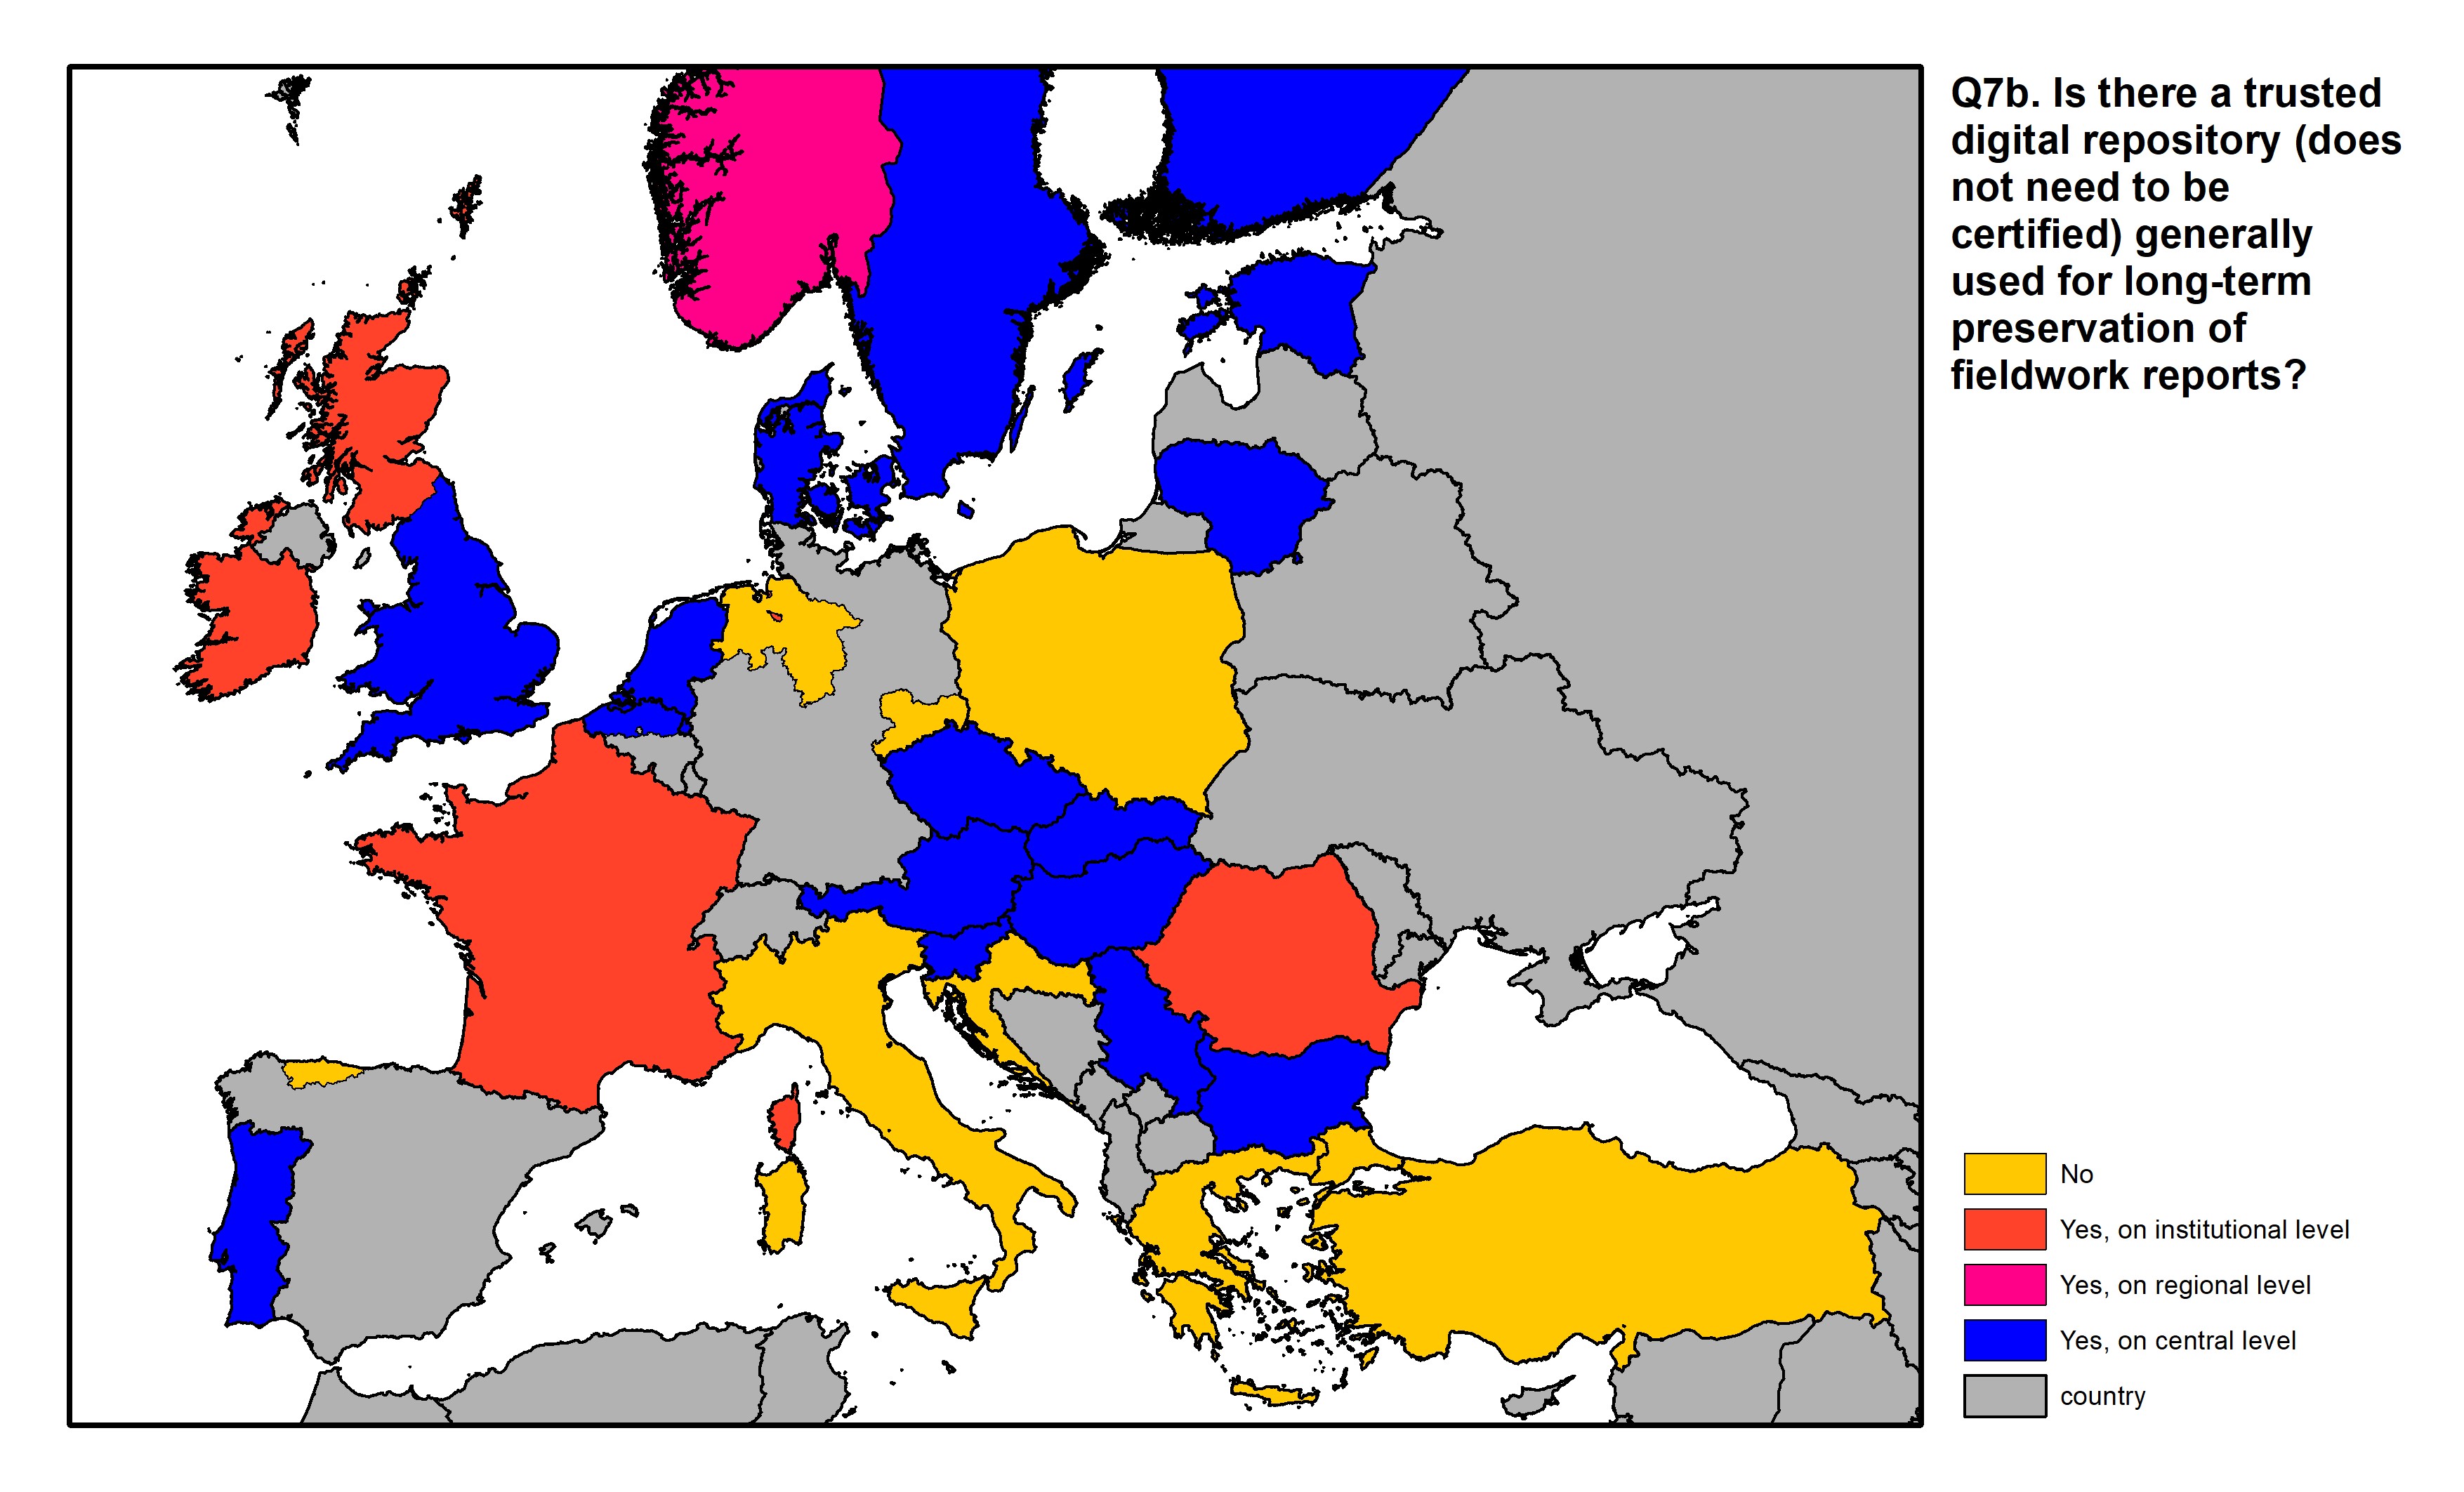 Figure 22: a map of Europe showing countries and regions in colour based on response rates to the survey question.